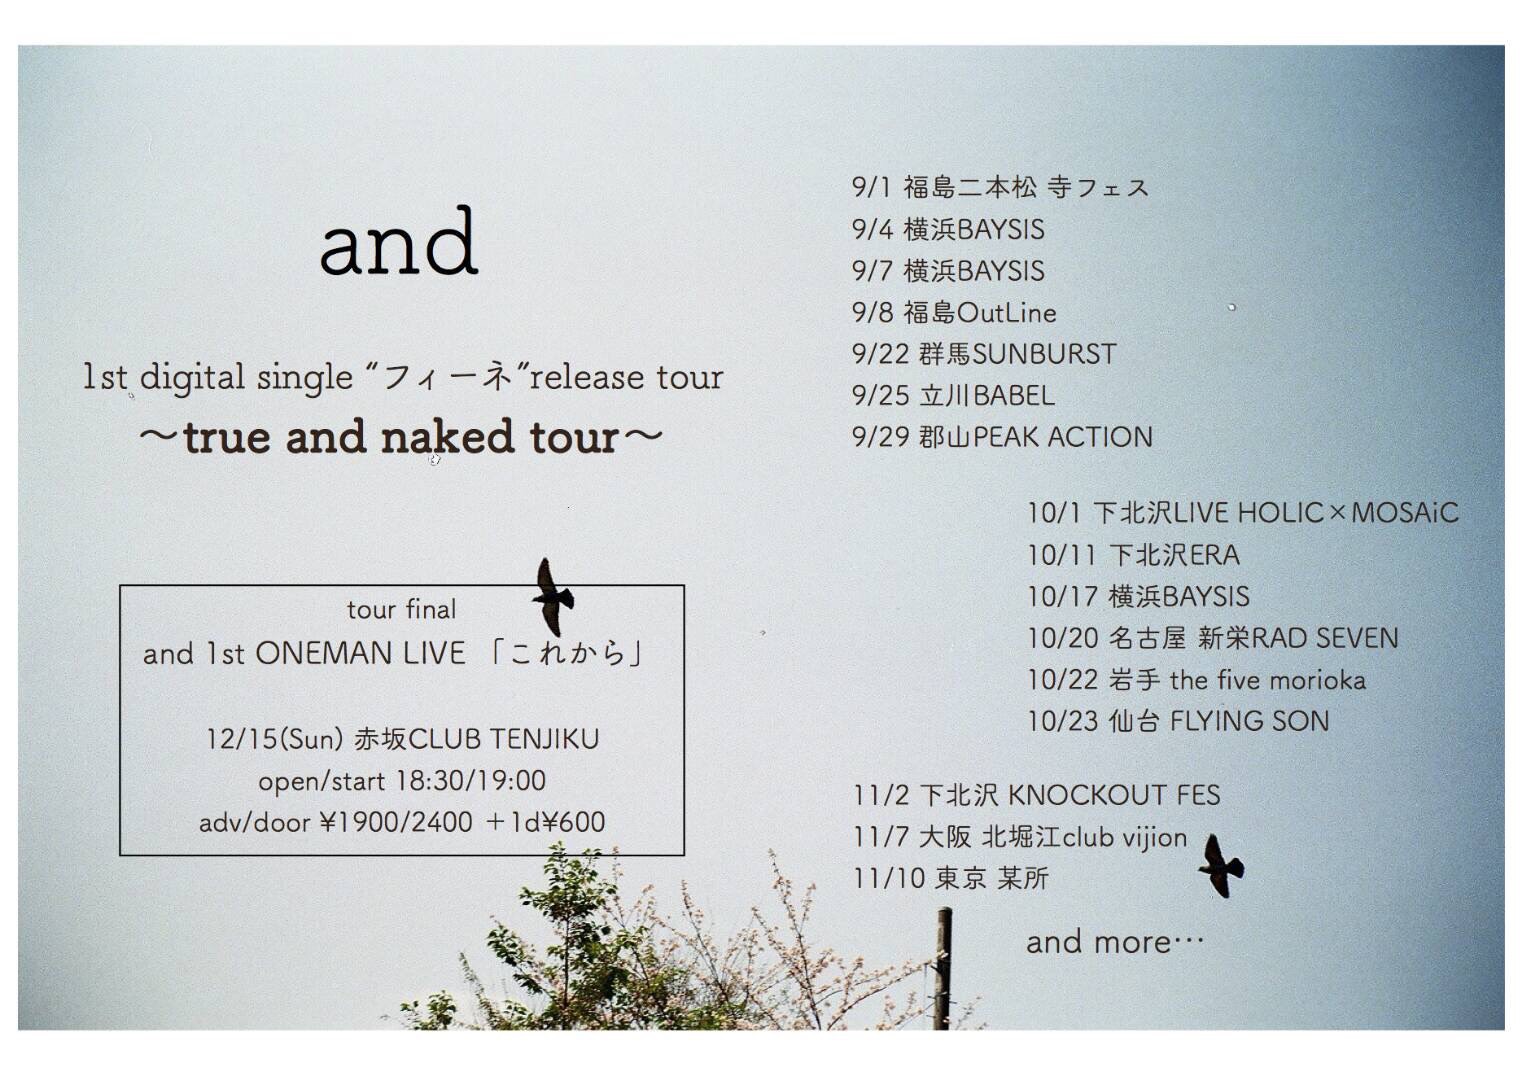 「and 1st digital single "フィーネ" release tour 〜true and naked tour〜」